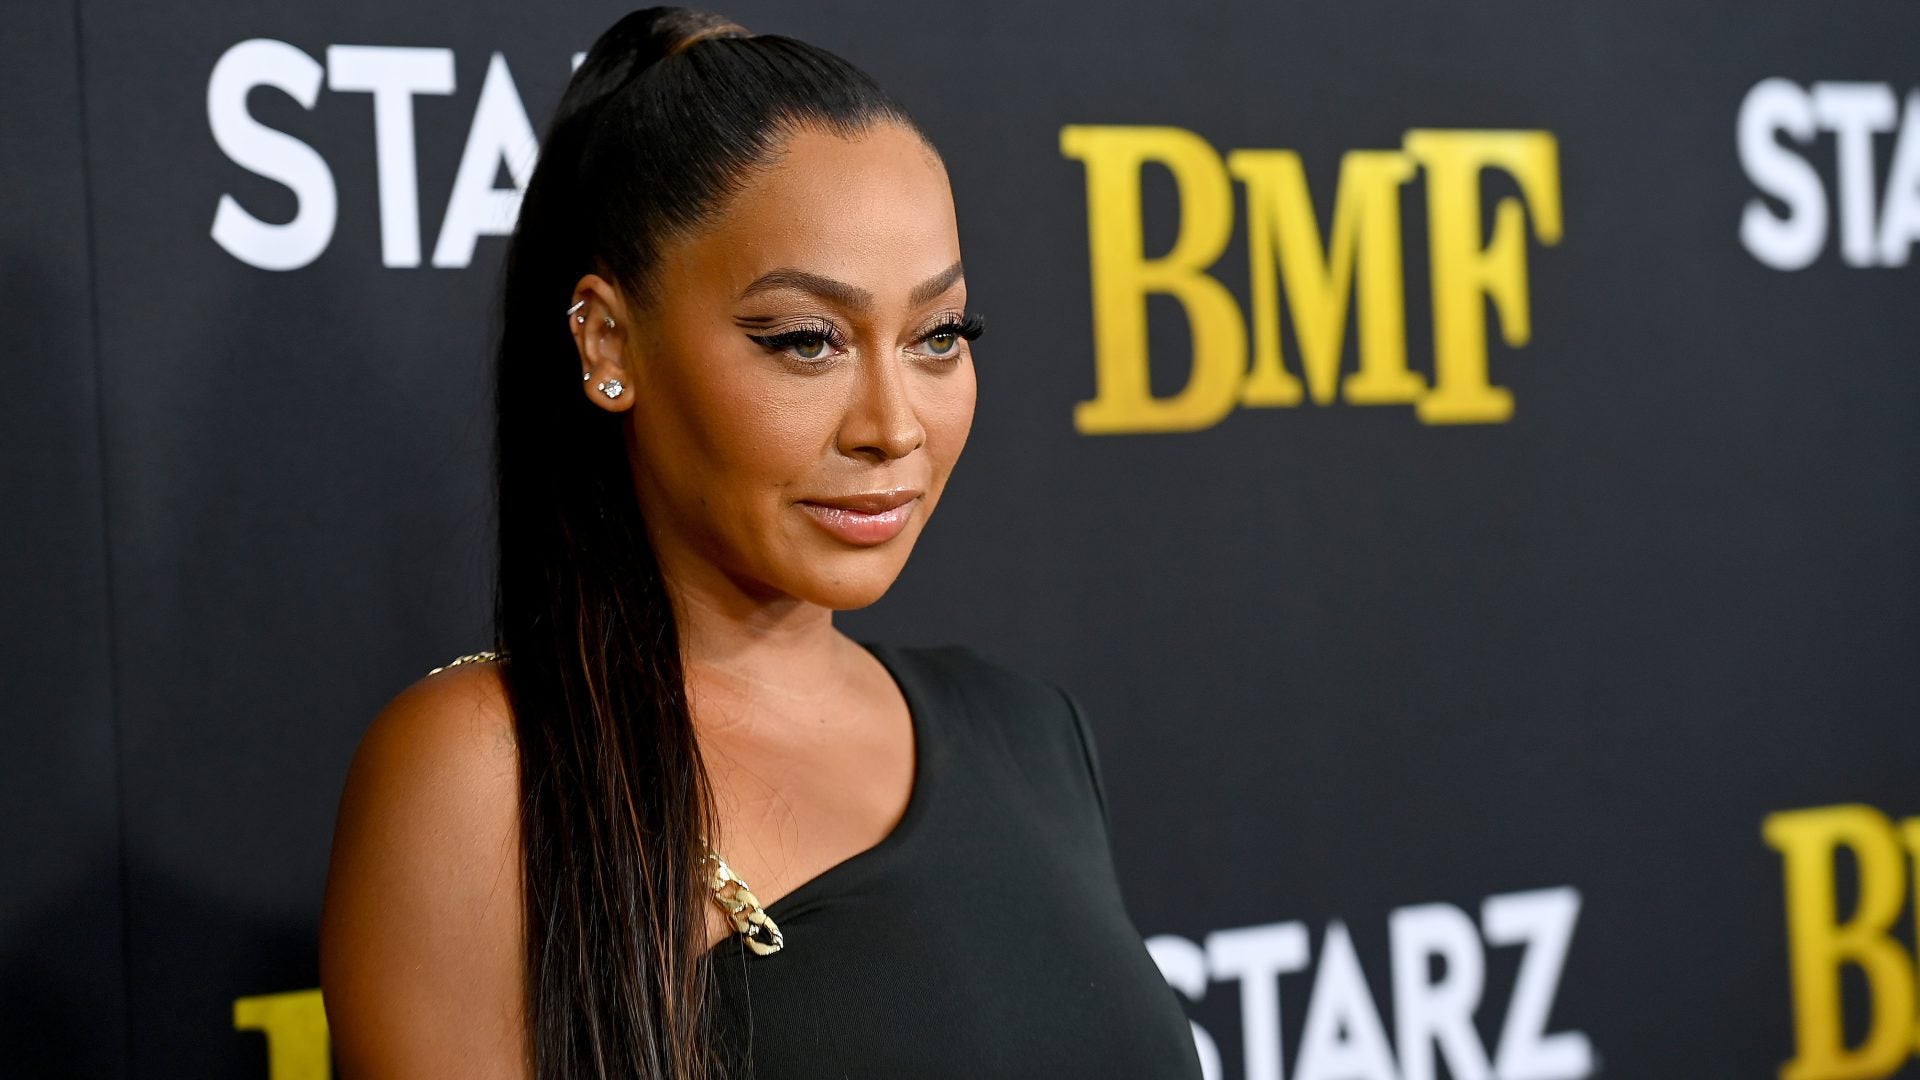 La La Anthony Reveals Heart Condition That Sent Her To The Emergency Room